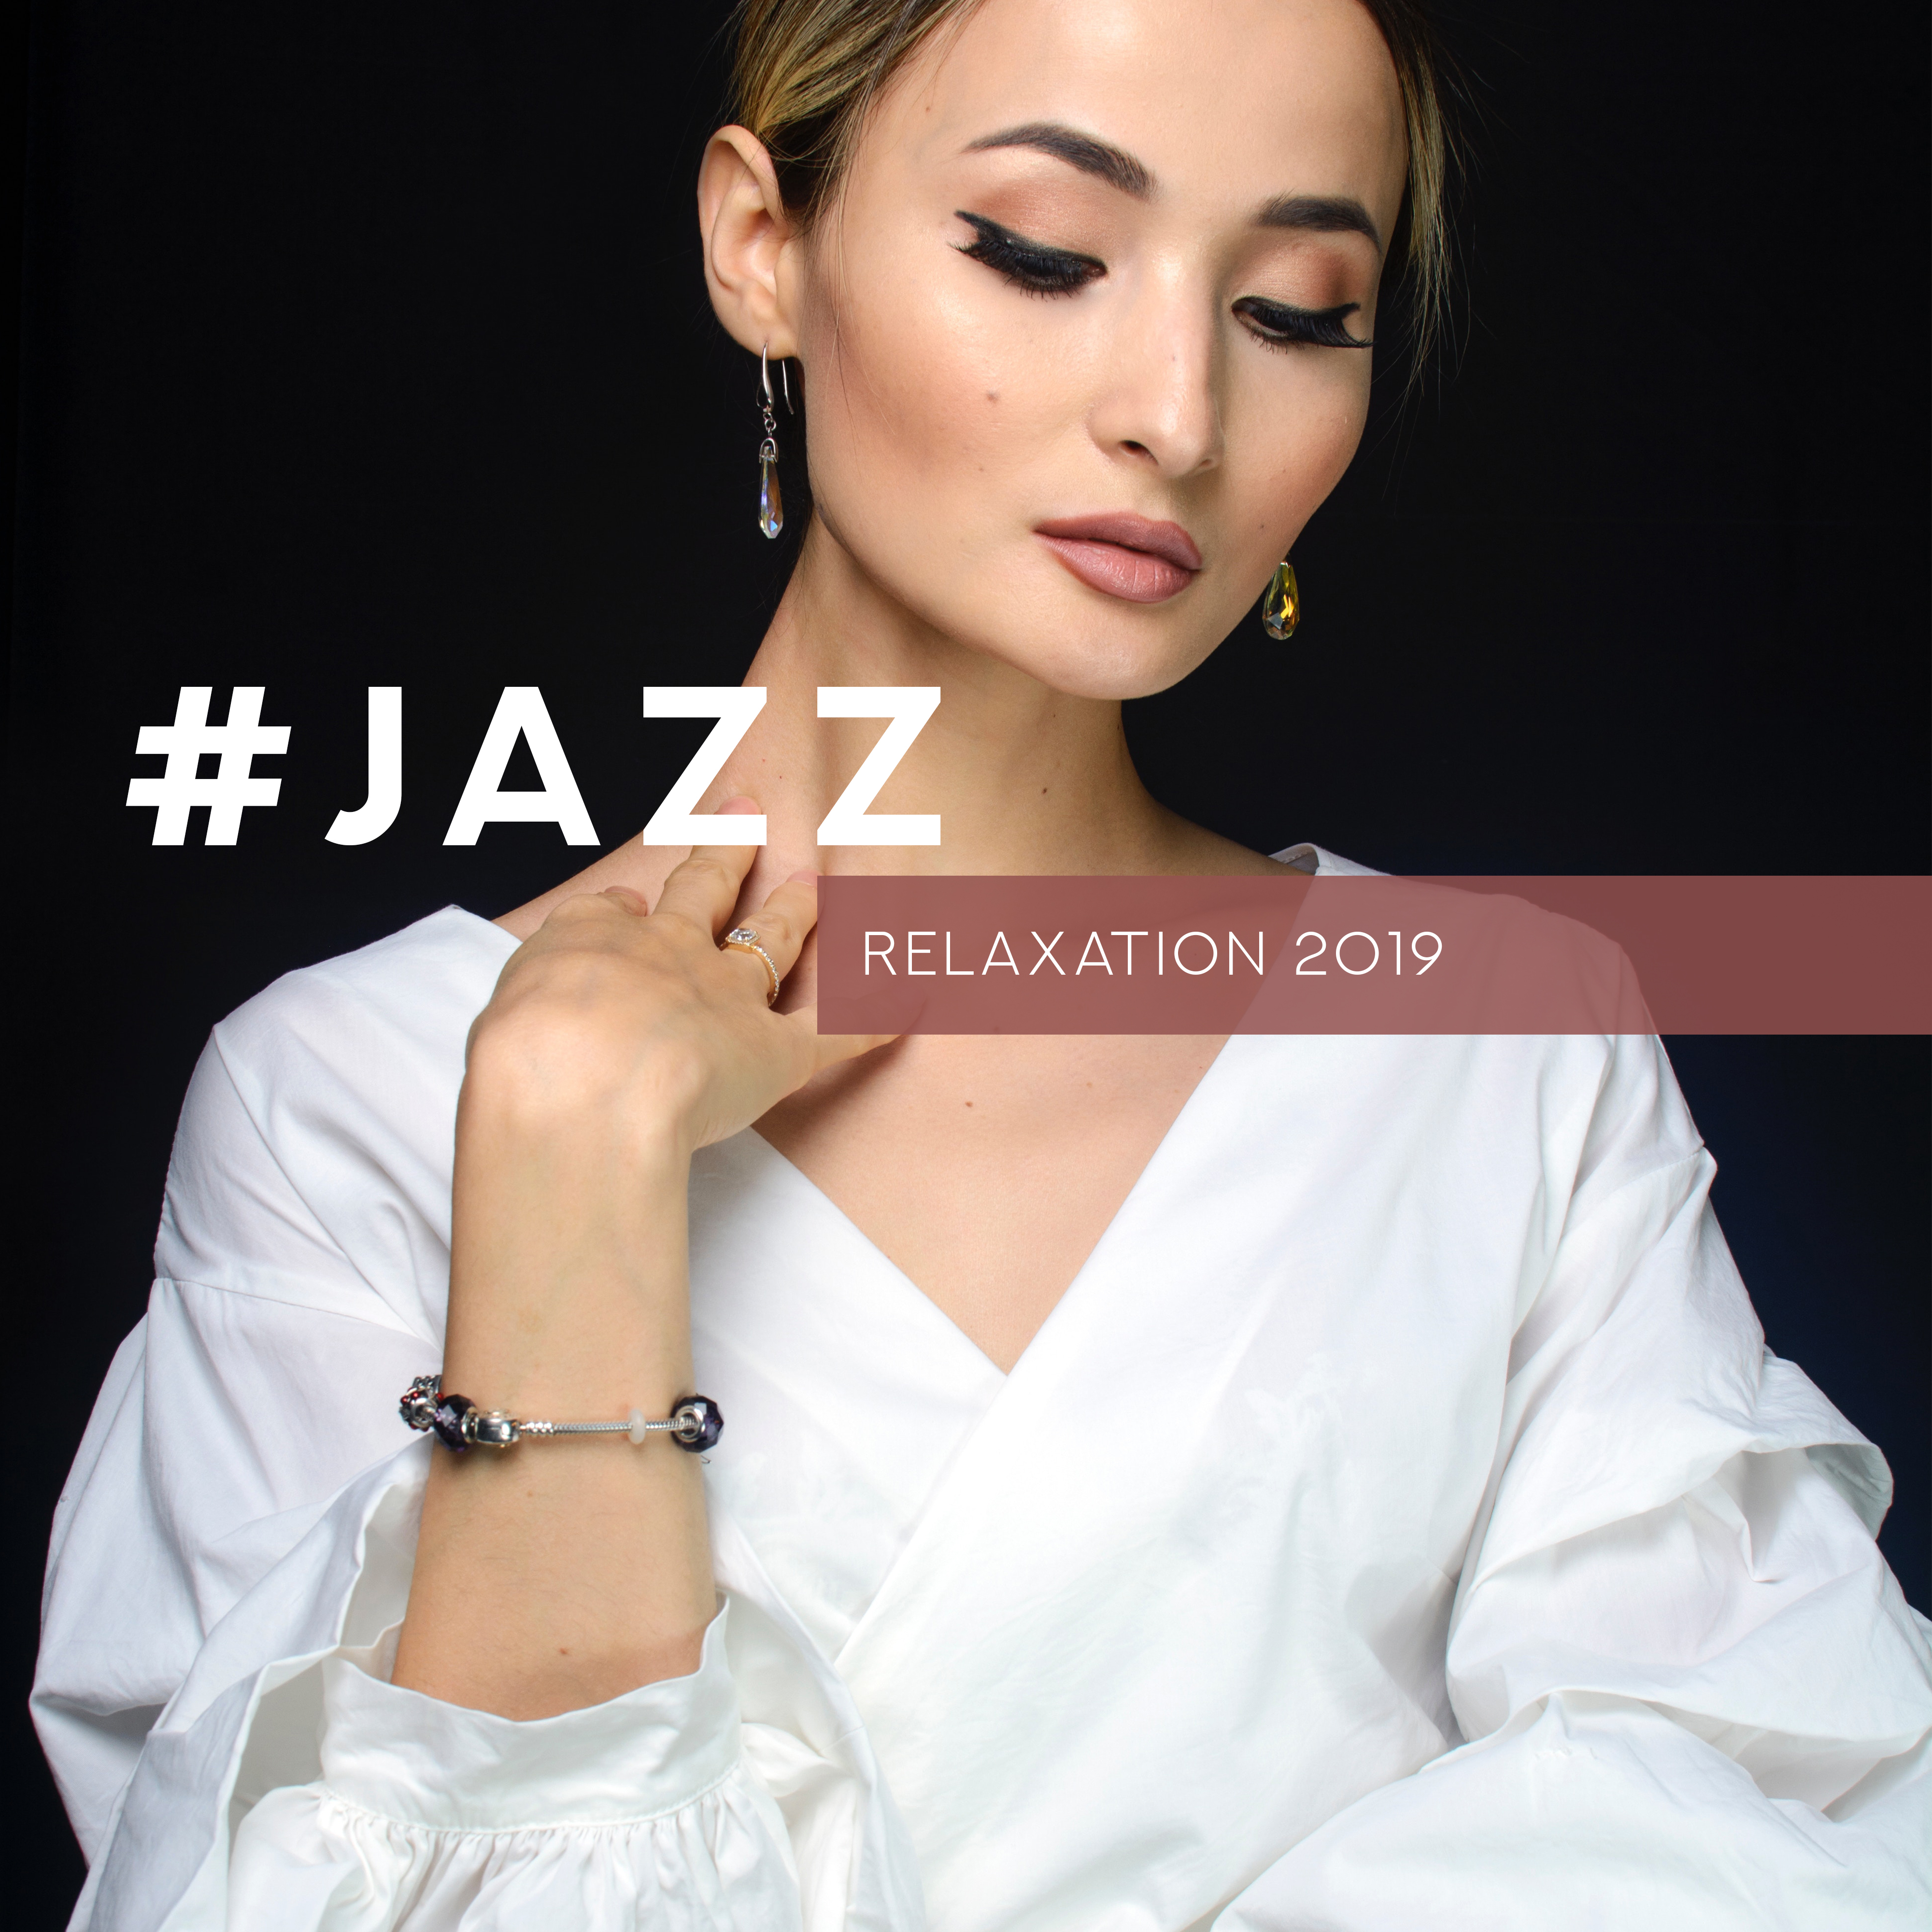 #Jazz Relaxation 2019 – Smooth Jazz for Relaxation, Ambient Instrumental Jazz, Relax Zone, Calming Music for Rest, Restaurant, Coffee